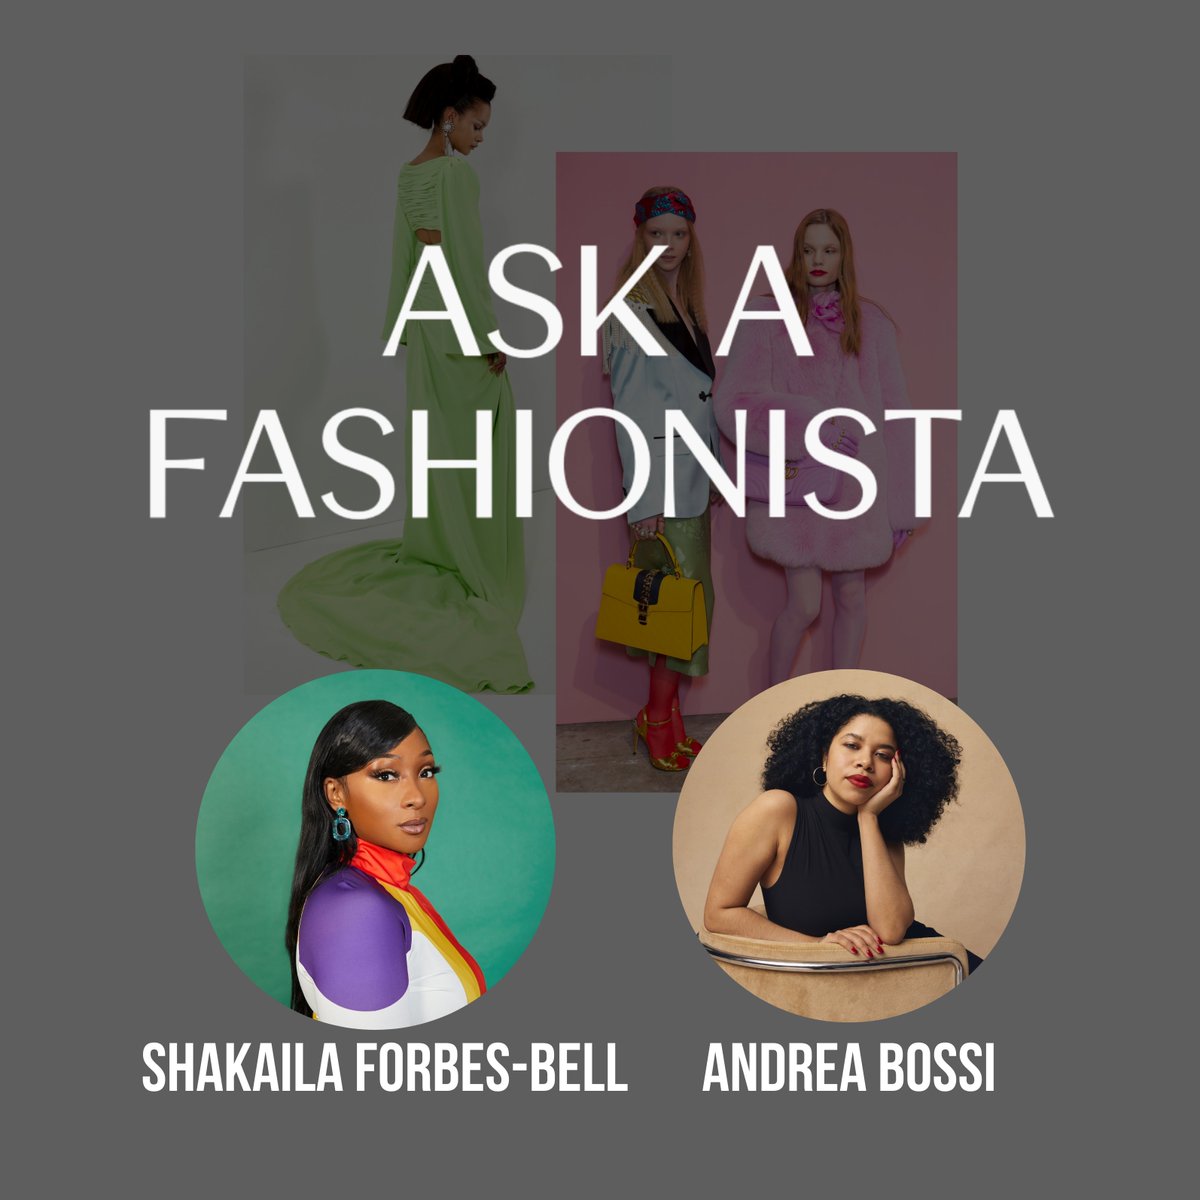 Join us for an insightful conversation with trailblazer Shakaila Forbes-Bell, the first Black person to earn a master's degree in fashion psychology! On the Fashionista Network, April 24th, 2pm EST ow.ly/ehNY50Rk5Ir #thefashionistanetwork #fashionpsychology